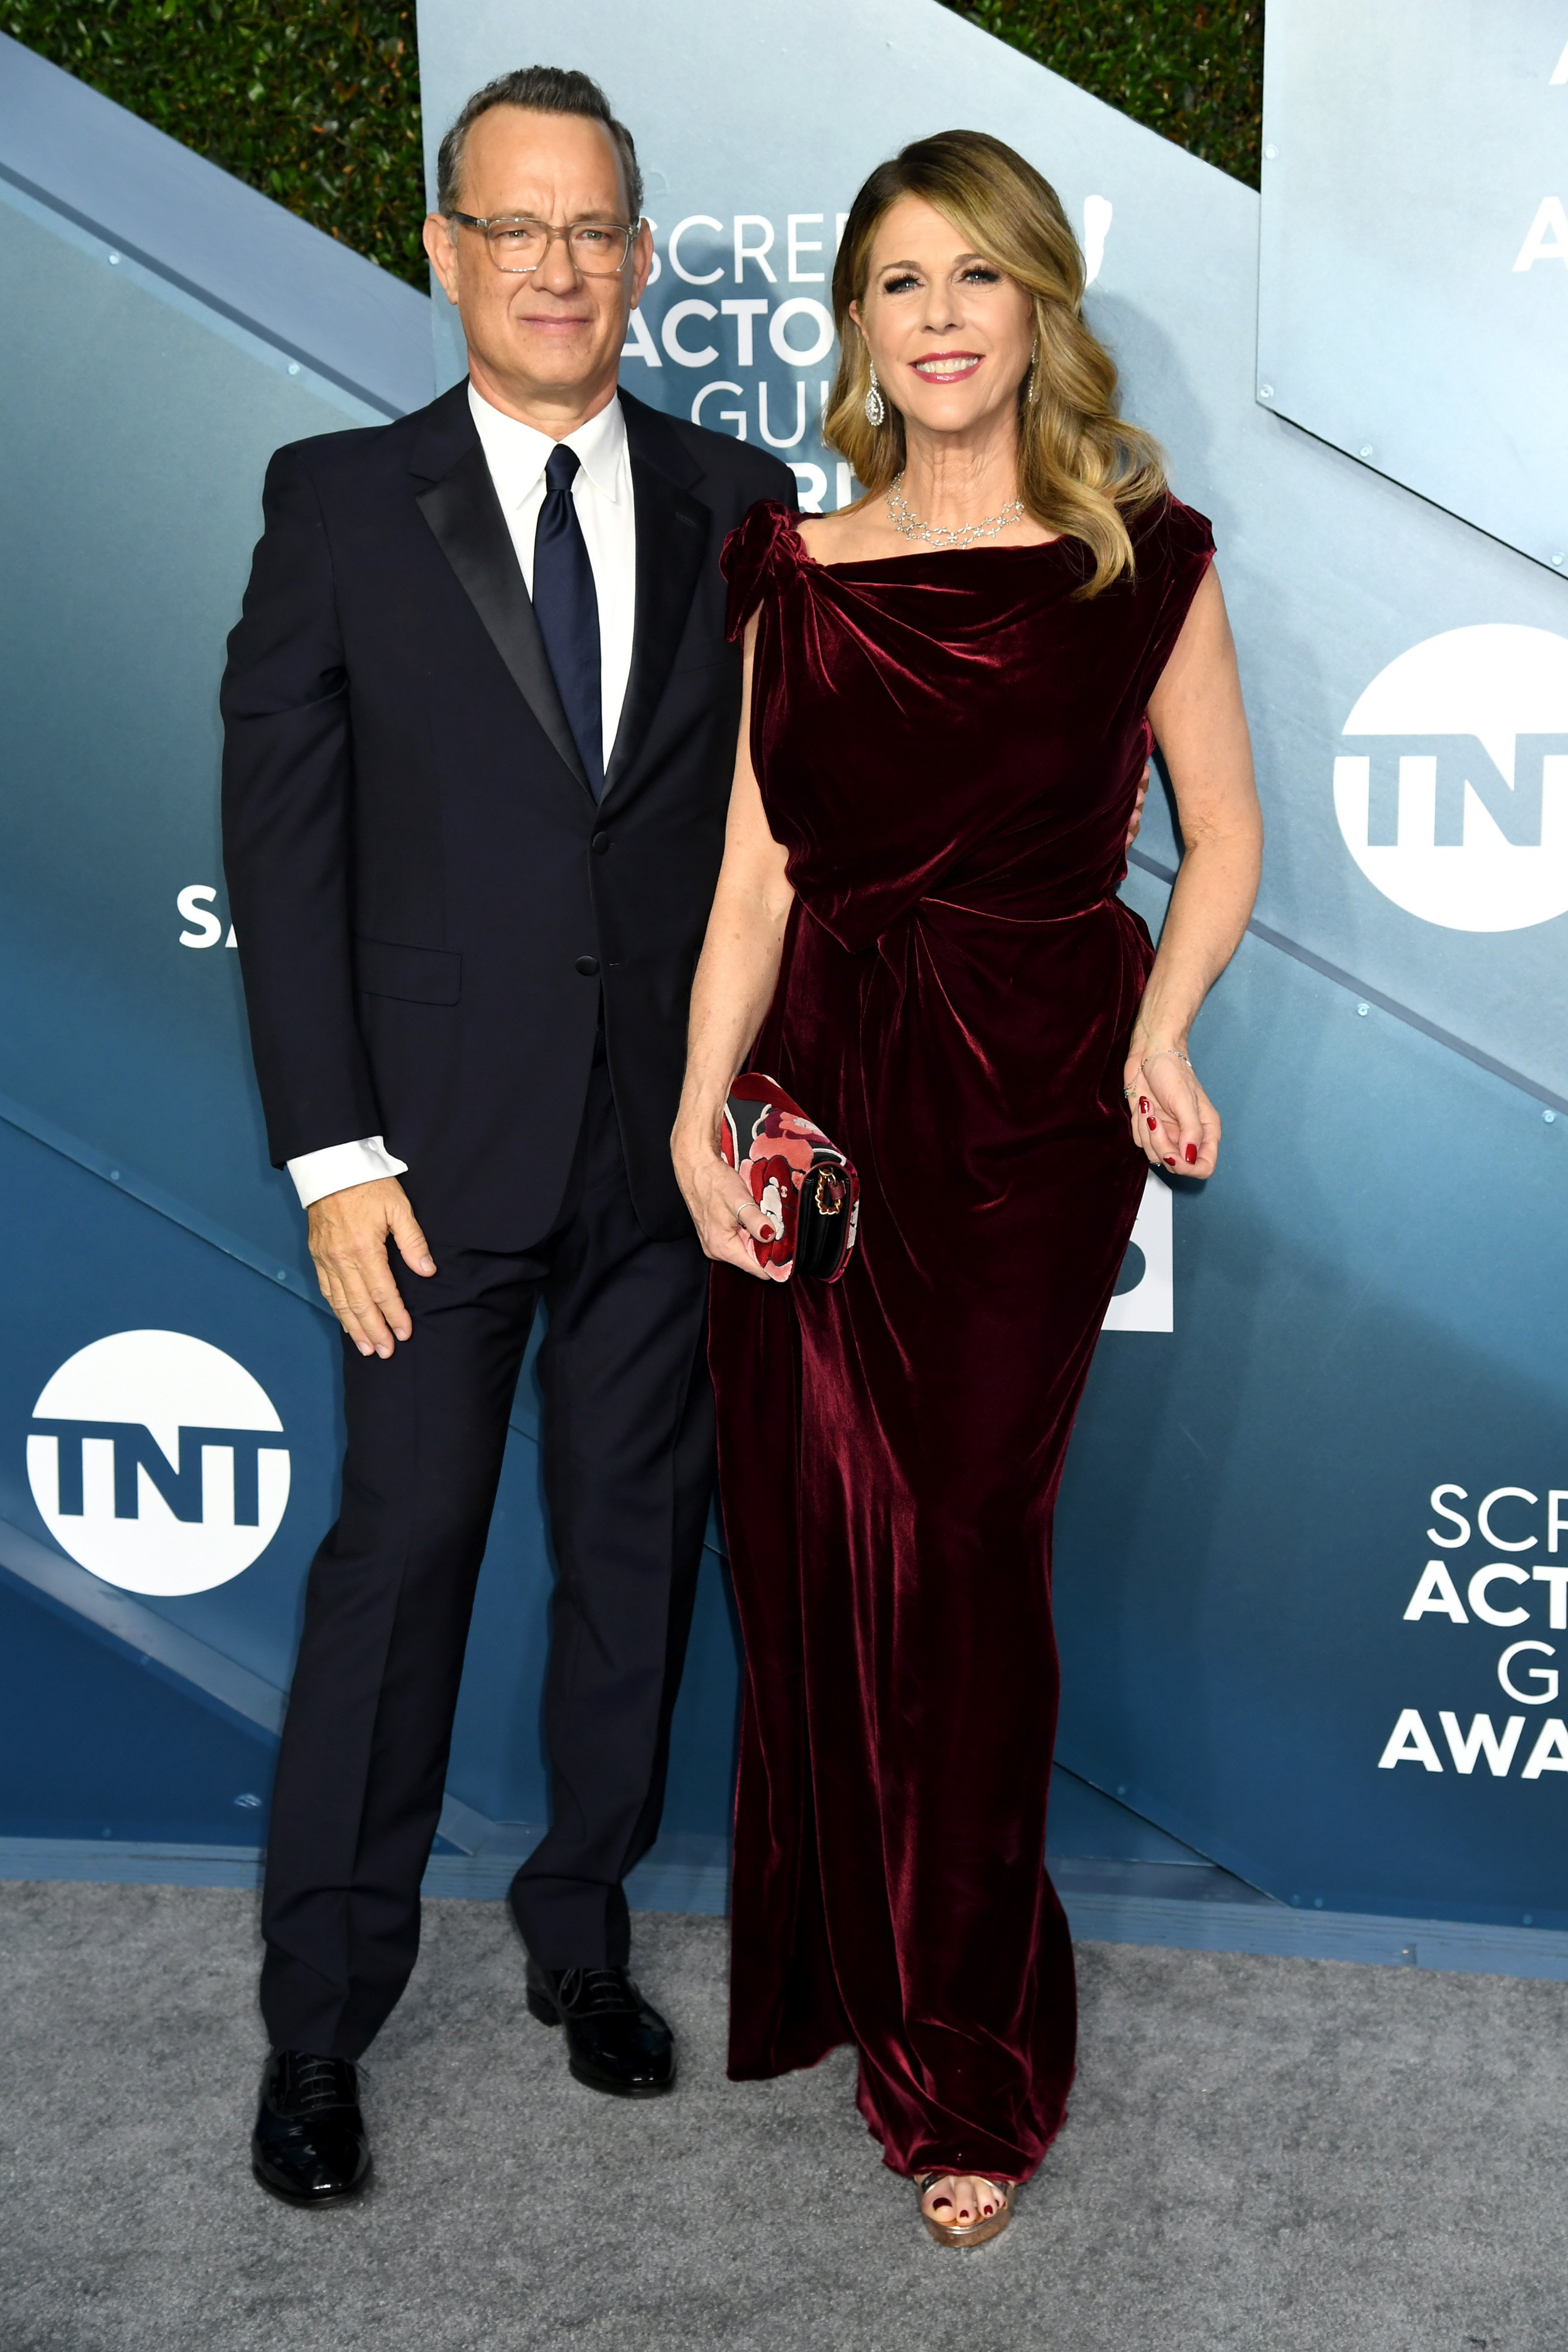 Tom Hanks and Rita Wilson attends the 26th Annual Screen Actors Guild Awards on January 19, 2020, in Los Angeles, California. | Source: Getty Images.